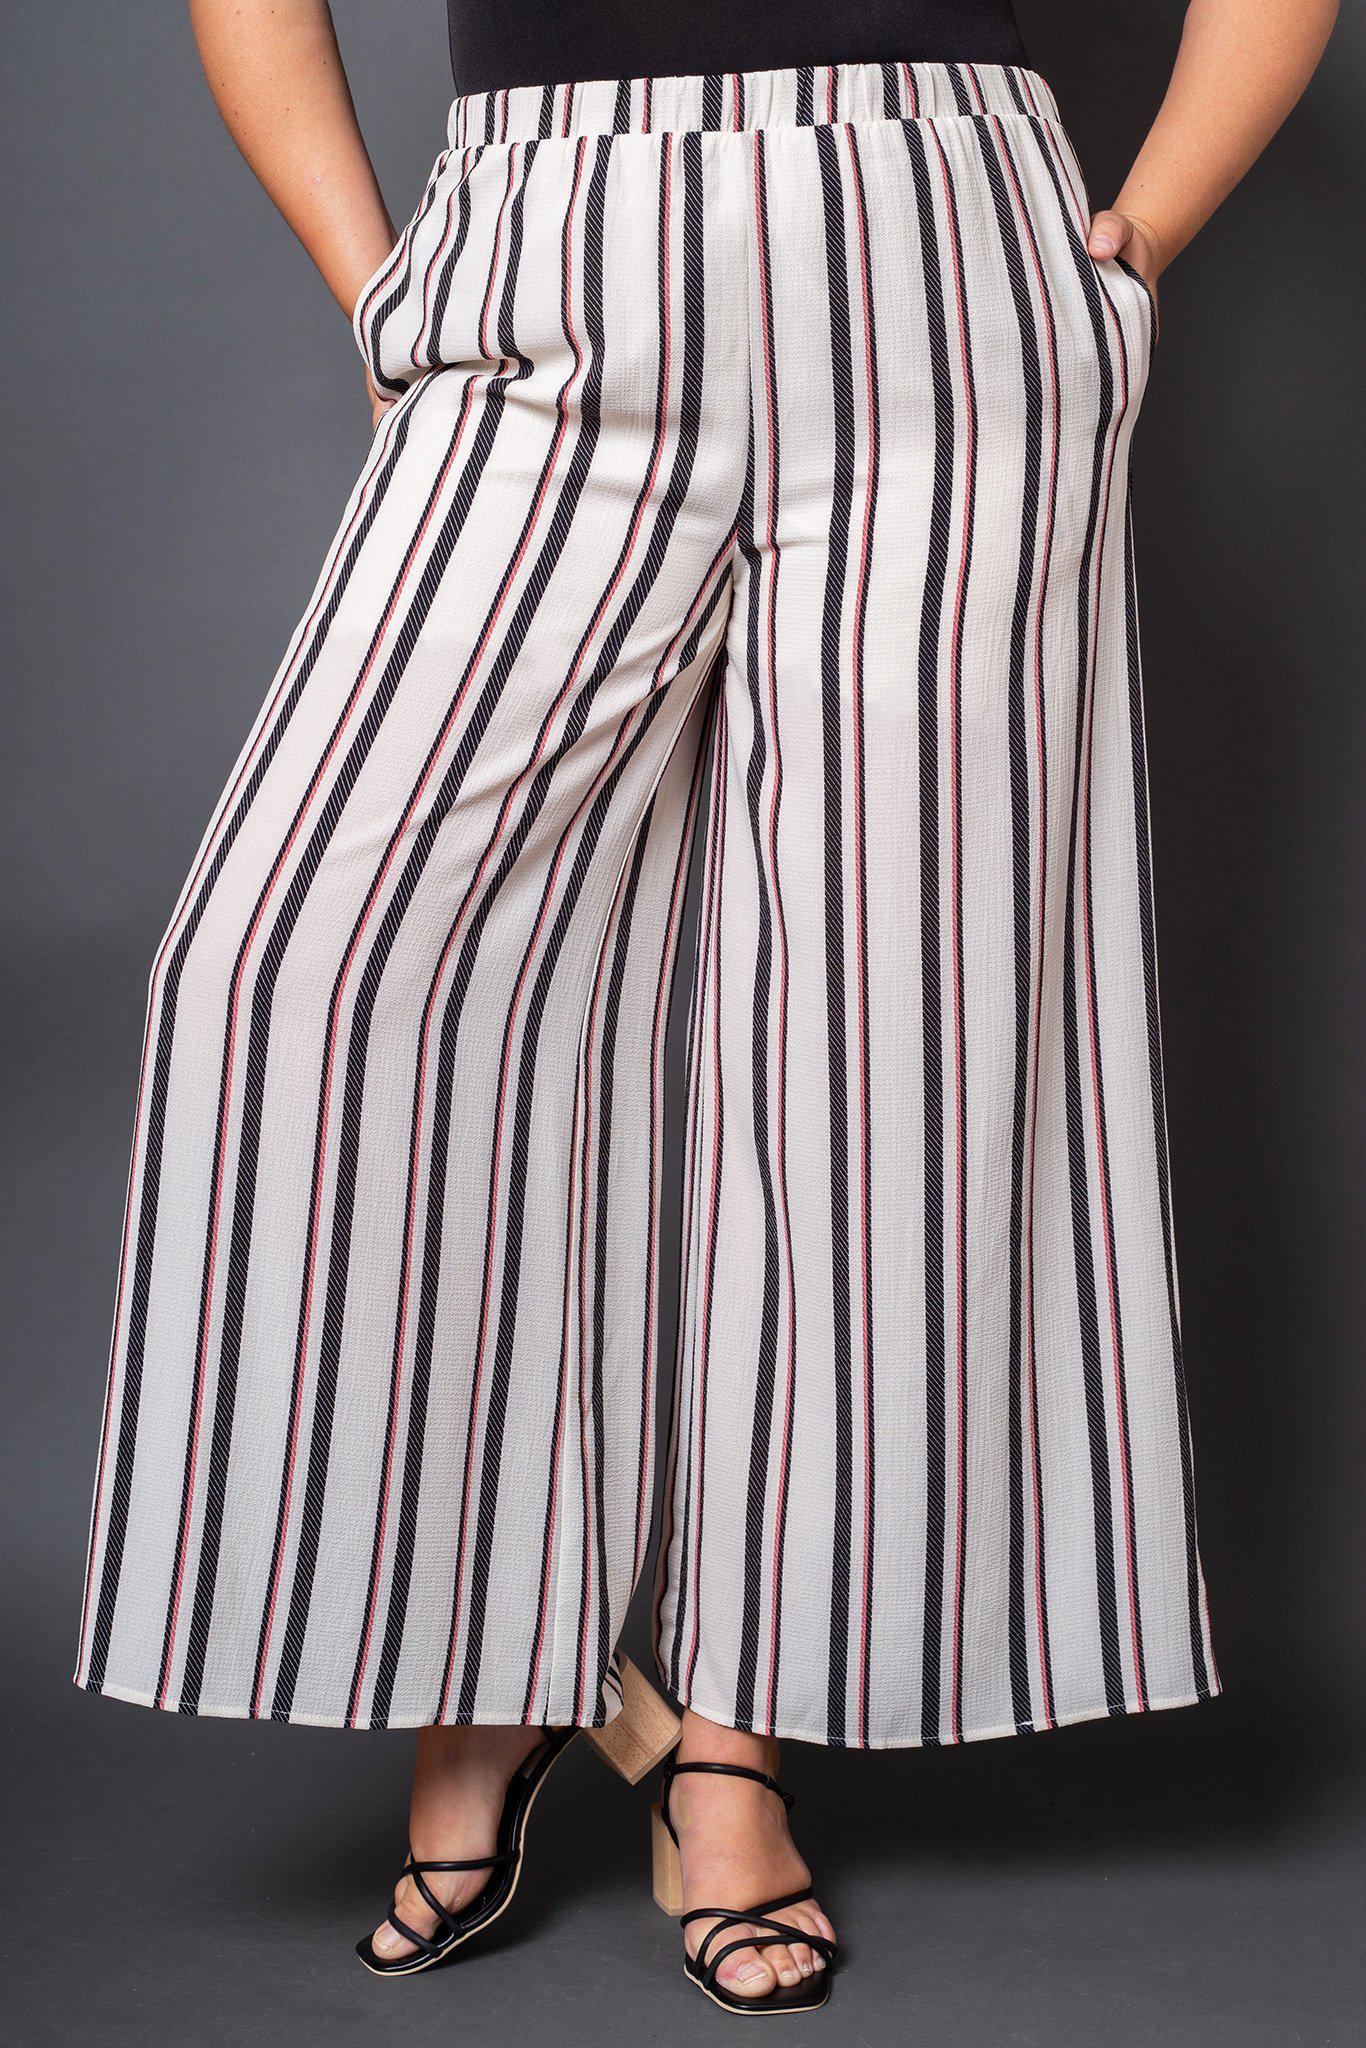 Nolita Striped Wide Leg Pants-matching sets, bottoms, clothing-Belle and Broome